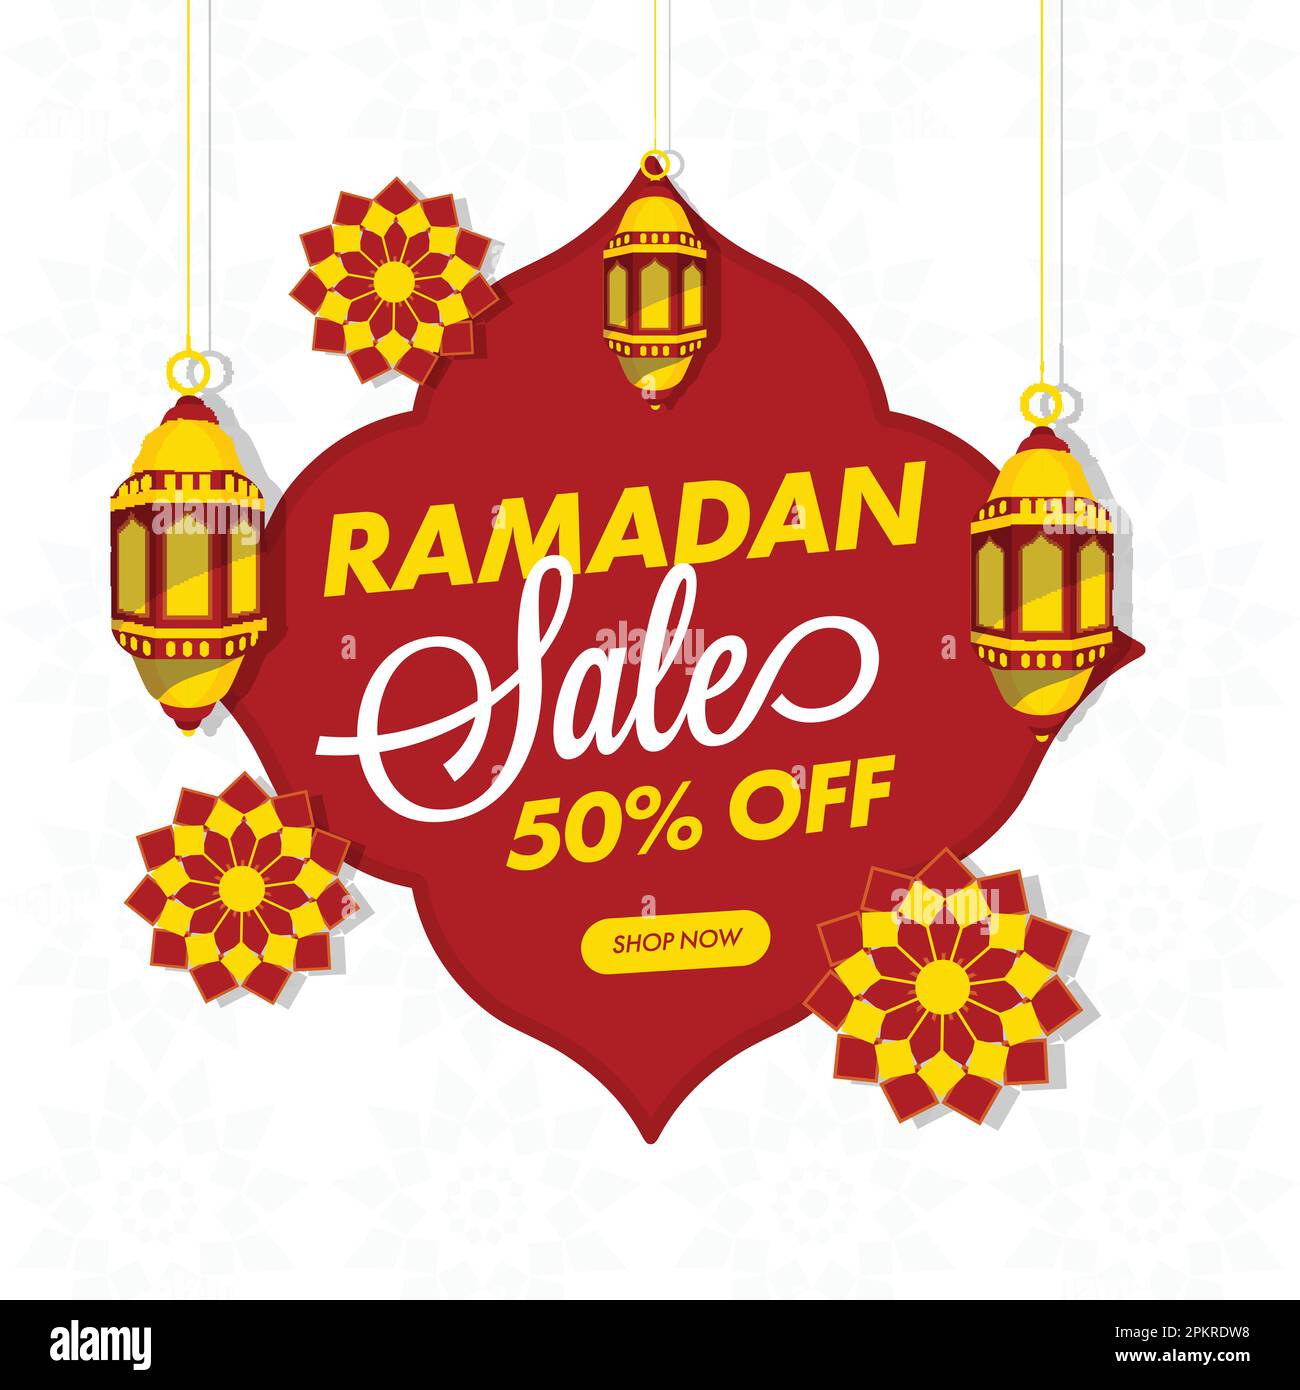 UP TO 50% Off For Ramadan Sale Poster Design With Hanging Lanterns And Islamic Pattern. Stock Vector